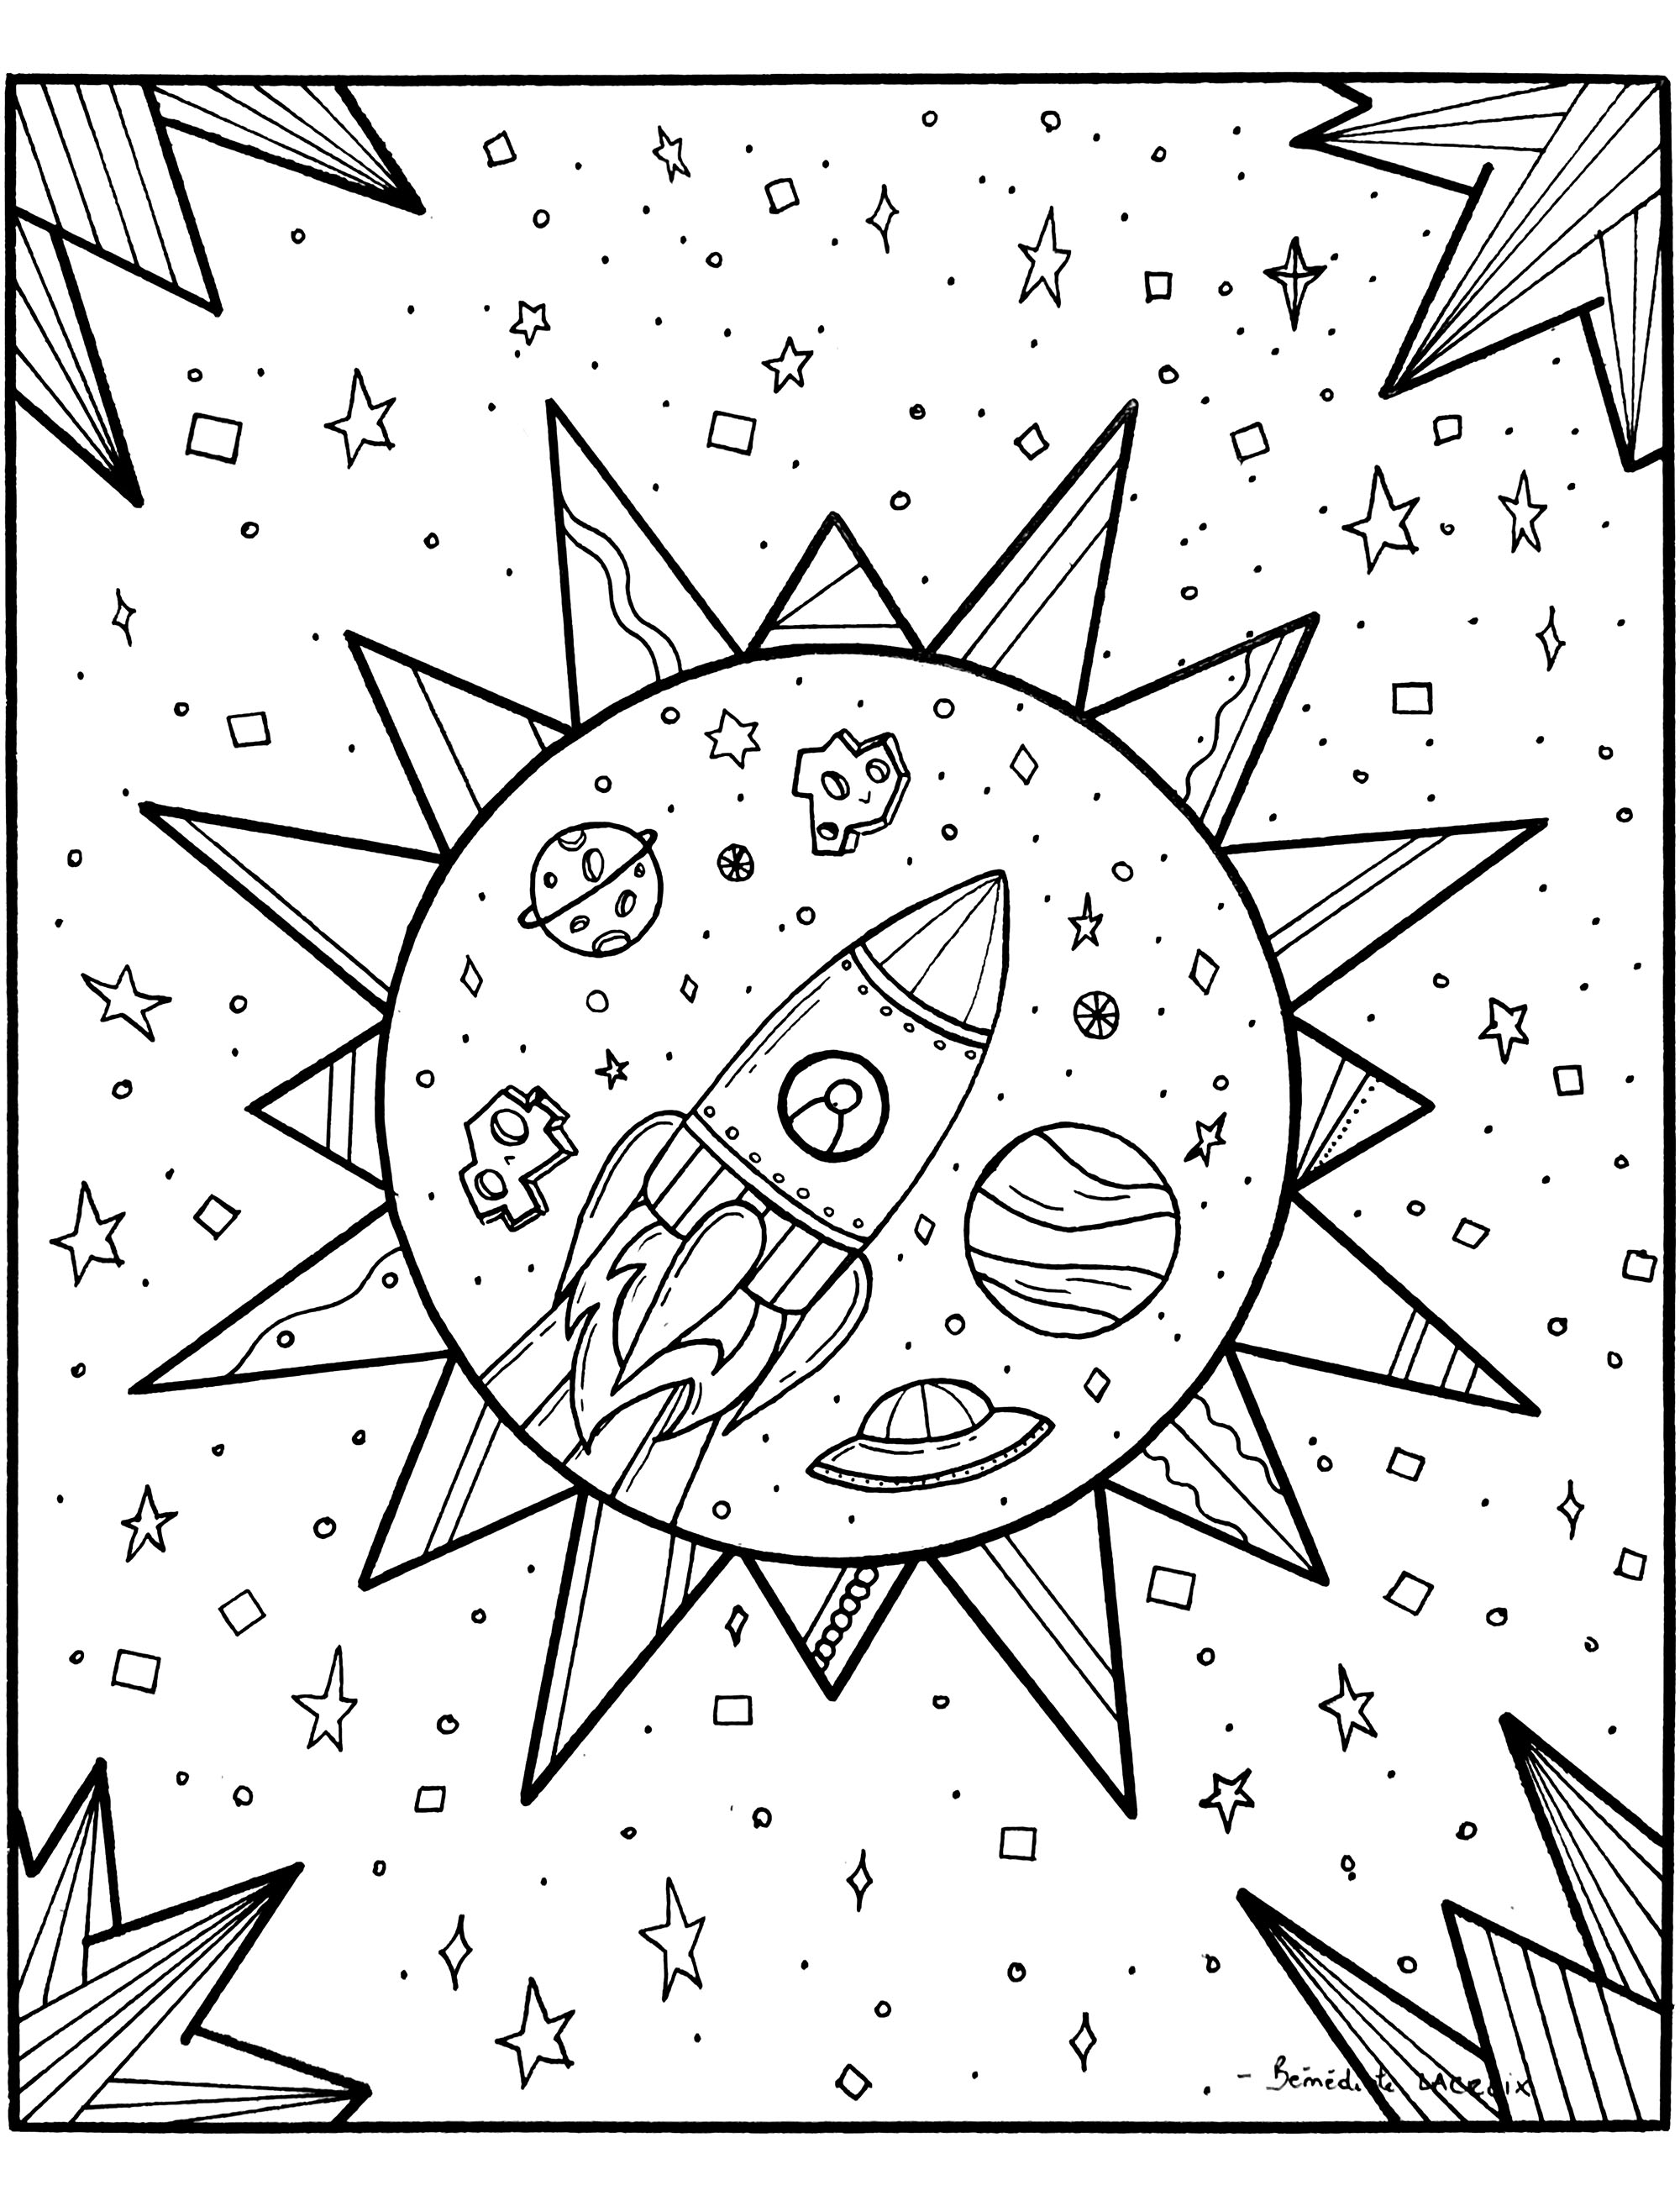 Rocket in the space - Anti stress Adult Coloring Pages